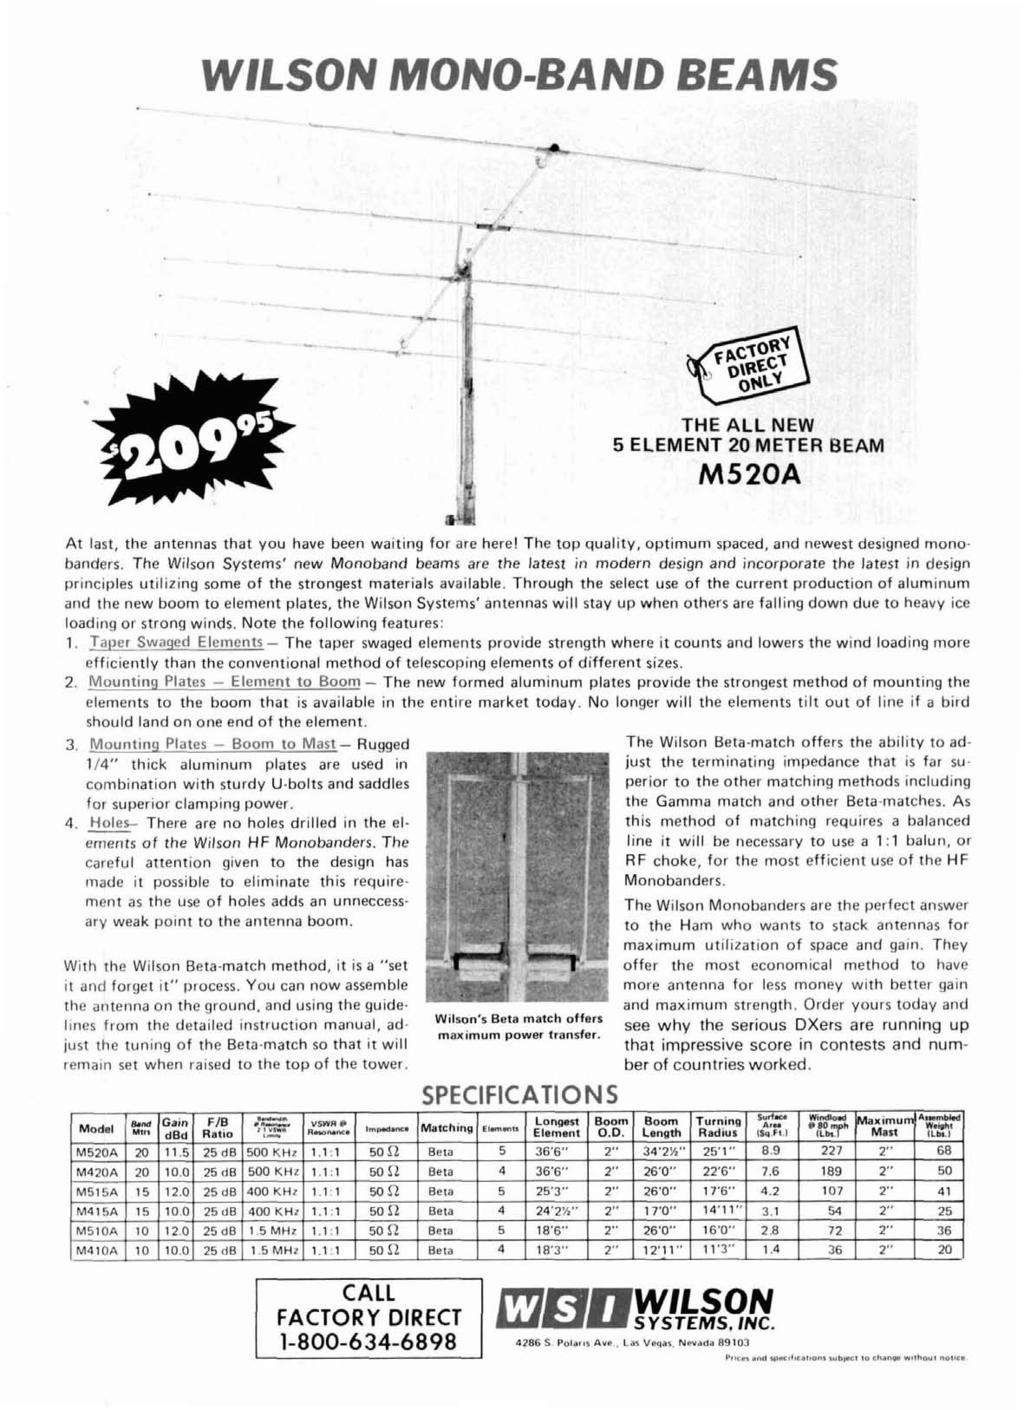 WILSON MONO-BAND REAMS - 7 - I /I THE ALL NEW 5 ELEMENT 20 METER BEAM I *'f- M520A At last, the antennas that you have been waiting for are here!